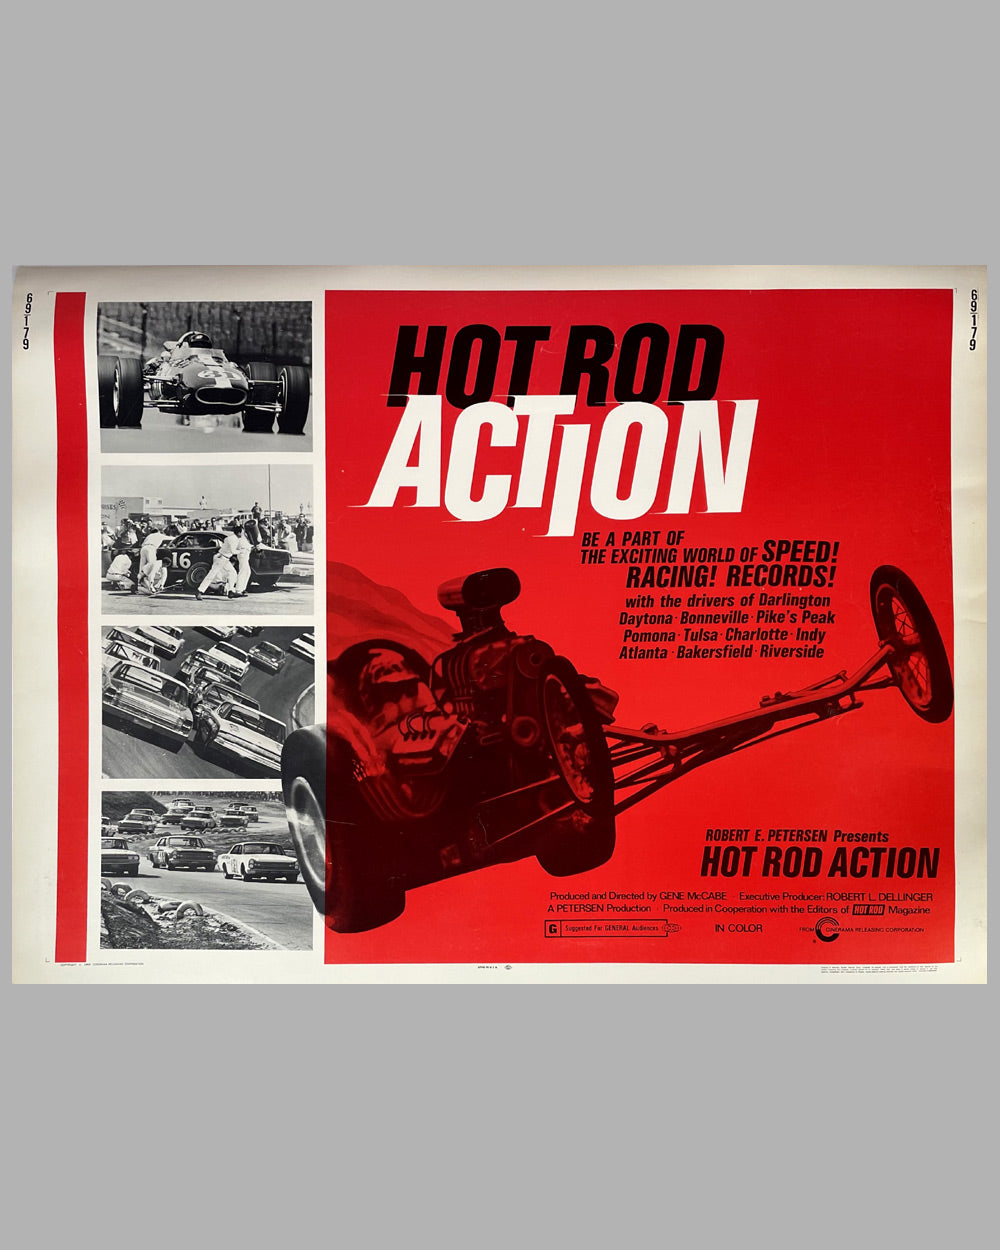 Hot Rod Action movie poster, 1969